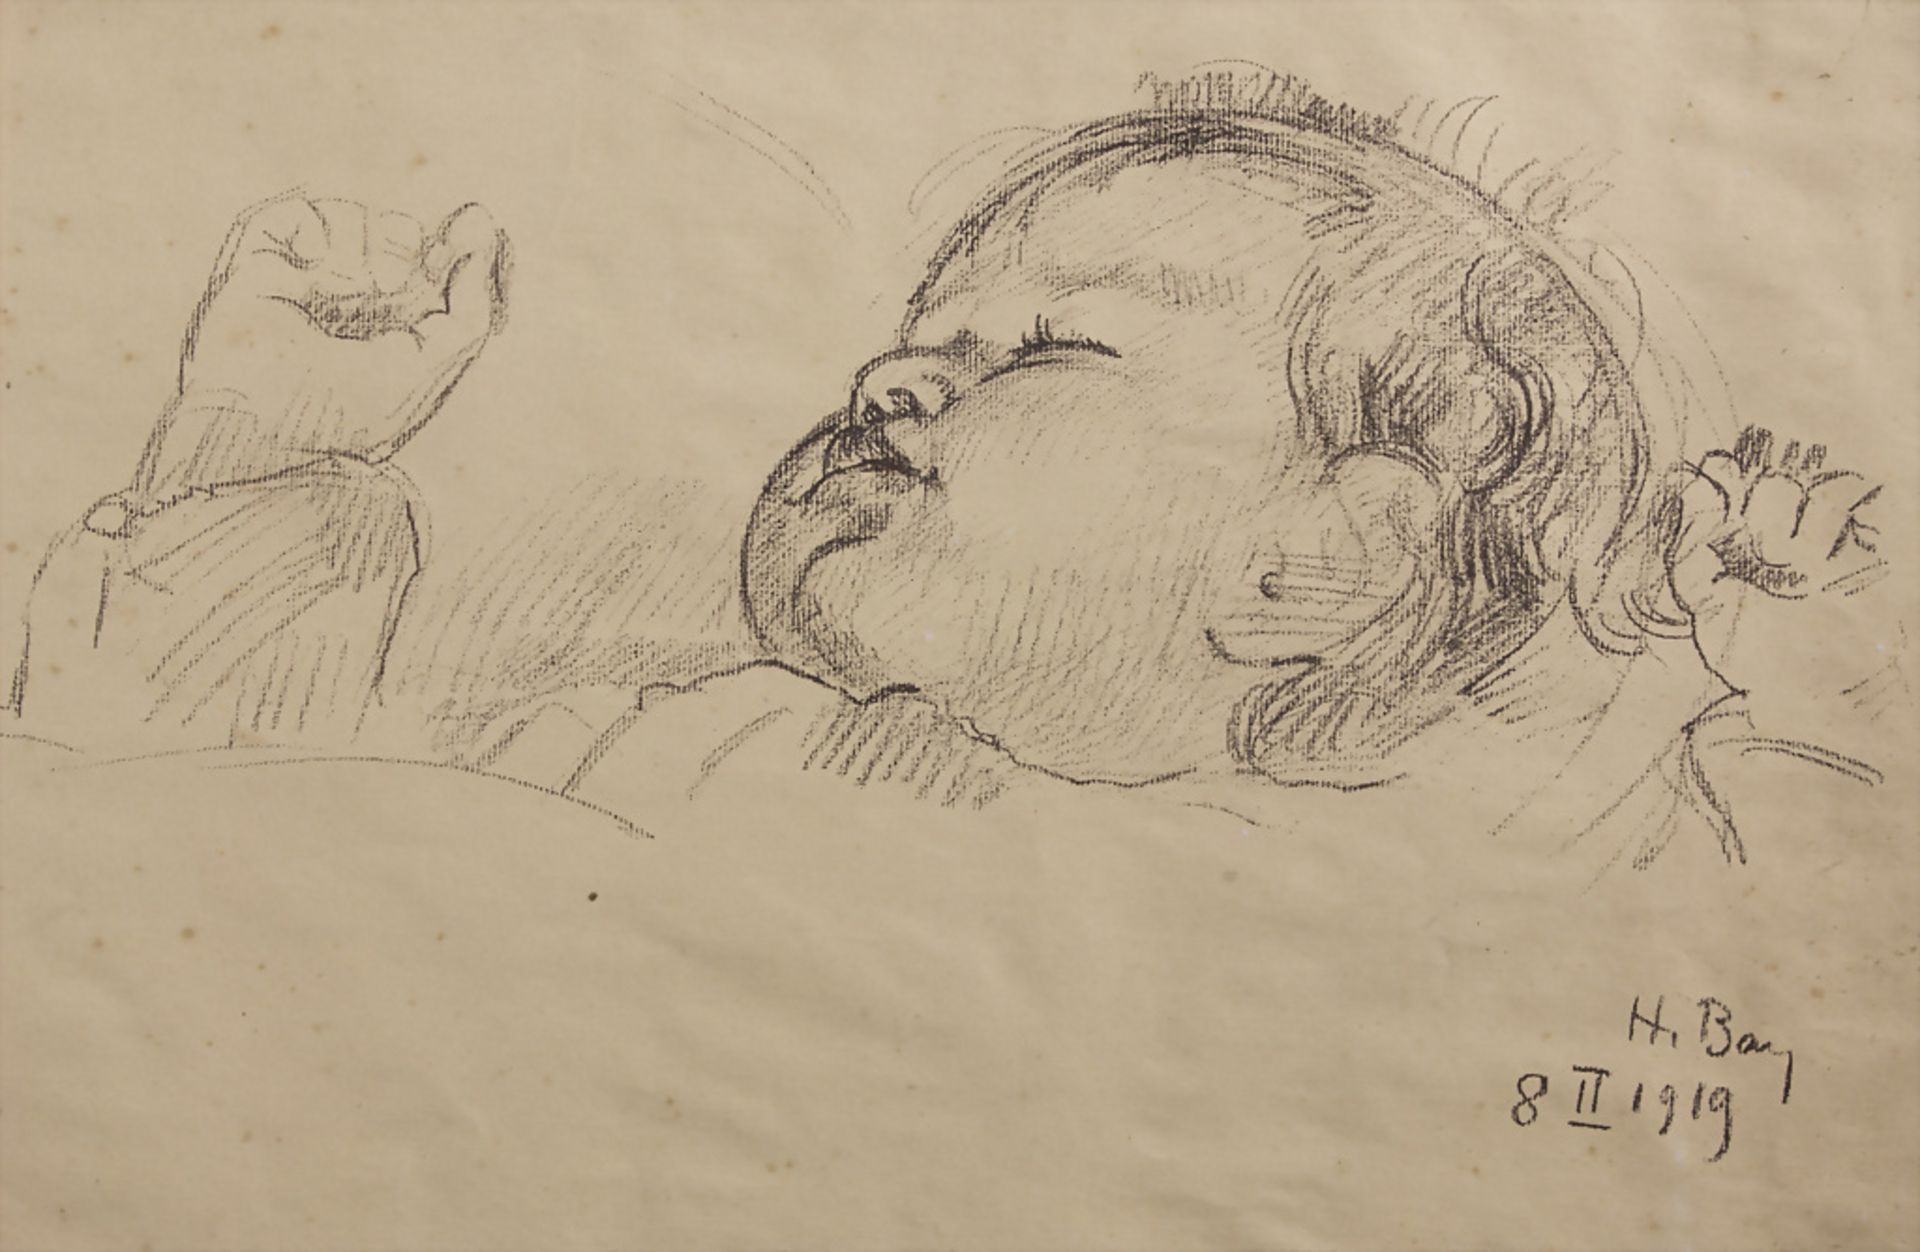 Hanni Bay (1885-1978), 'Schlafendes Baby' / 'A sleeping baby', 1919